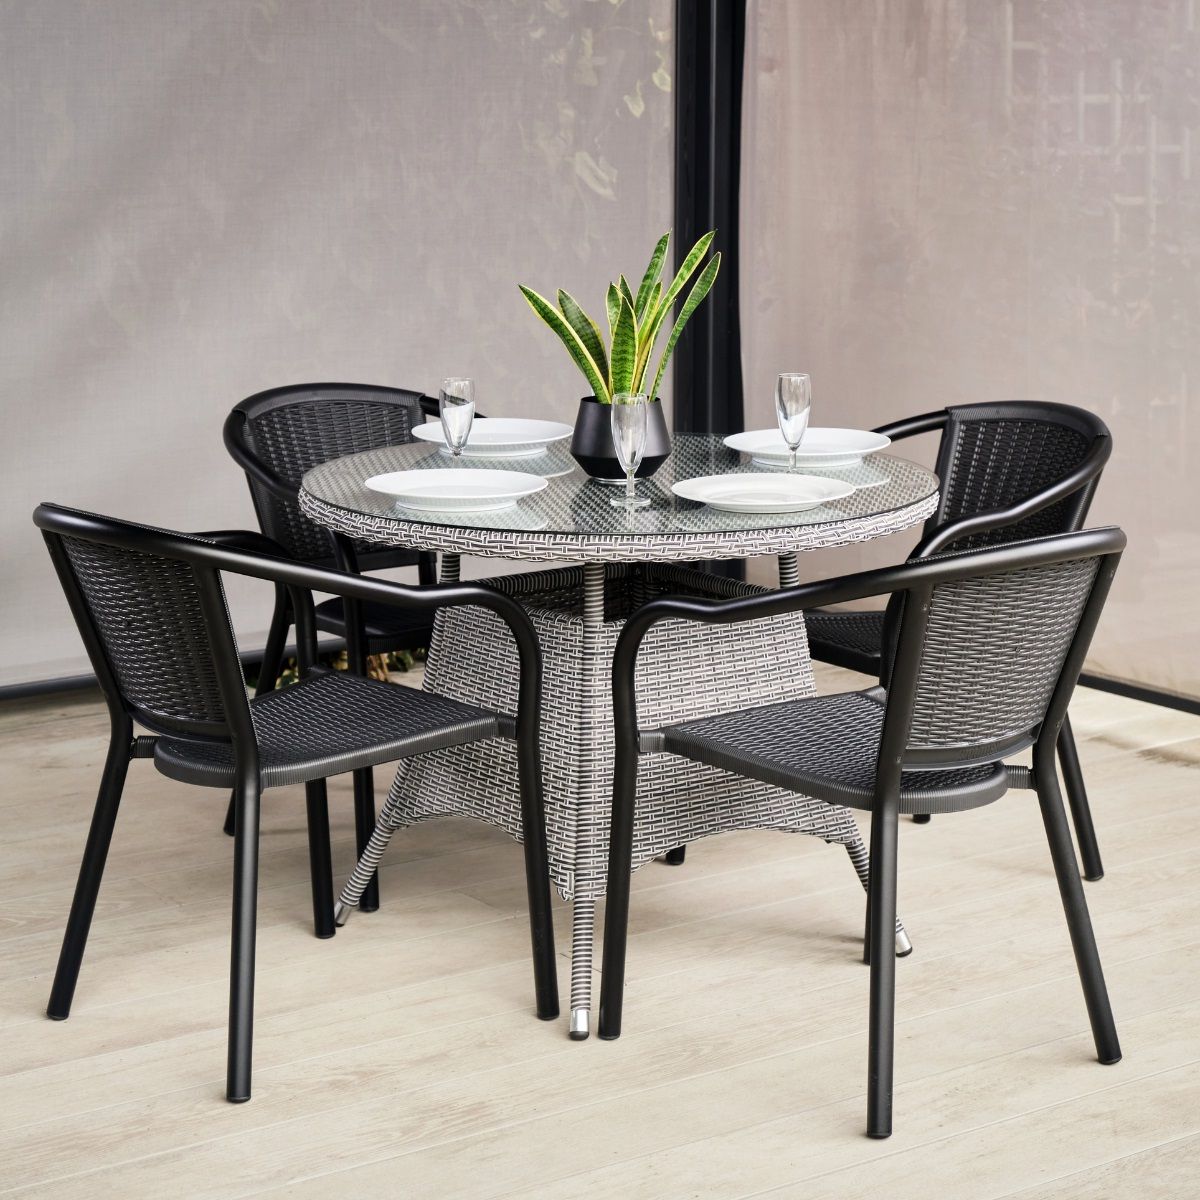 Widely Used Grey And Black Rattan Dining Table & Chairs Set – Woodberry Inside Rattan Outdoor Tables (View 7 of 15)